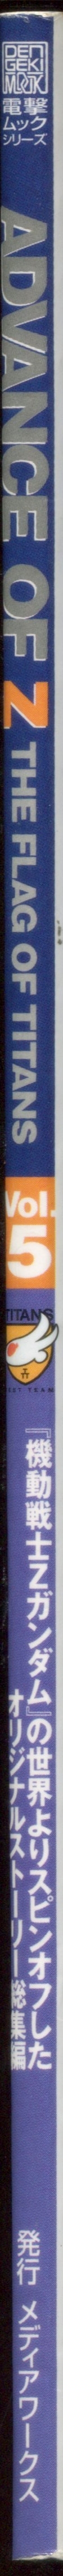 Advance of Z - The Flag of Titans Vol.5 102